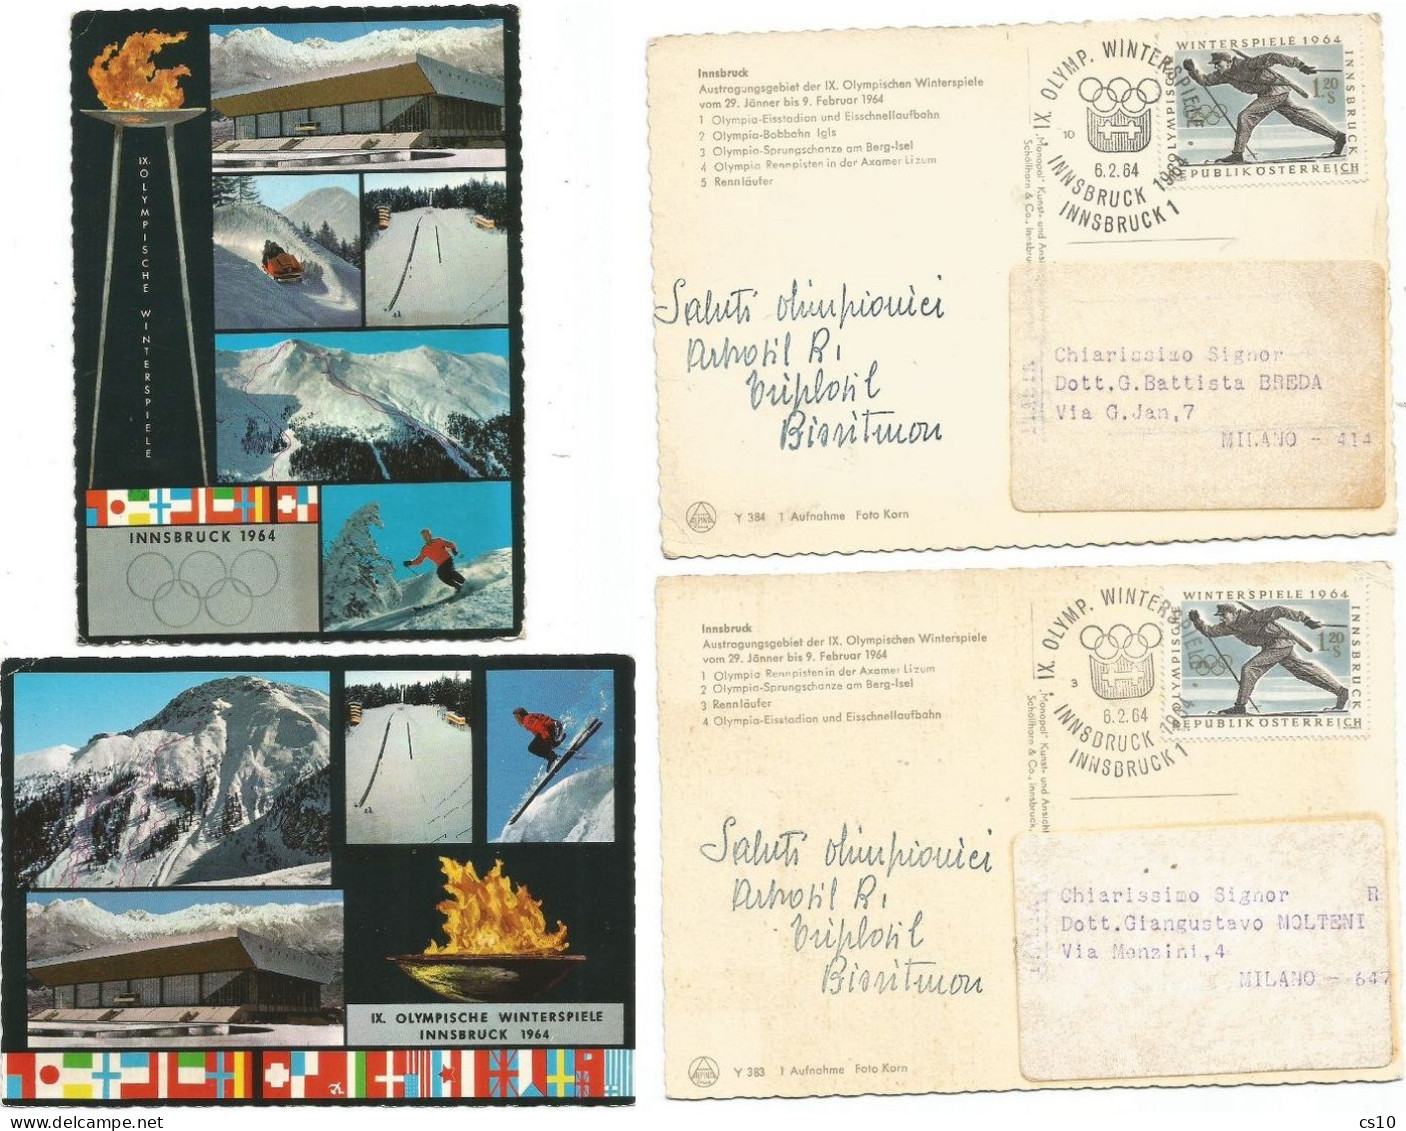 Winter Olympics 1964 Innsbruck Lot #4 Event Pcards With 3 Handsigns By Italian Athlets +# 2 ADV Promo Pcards Bioritmon - Olympic Games